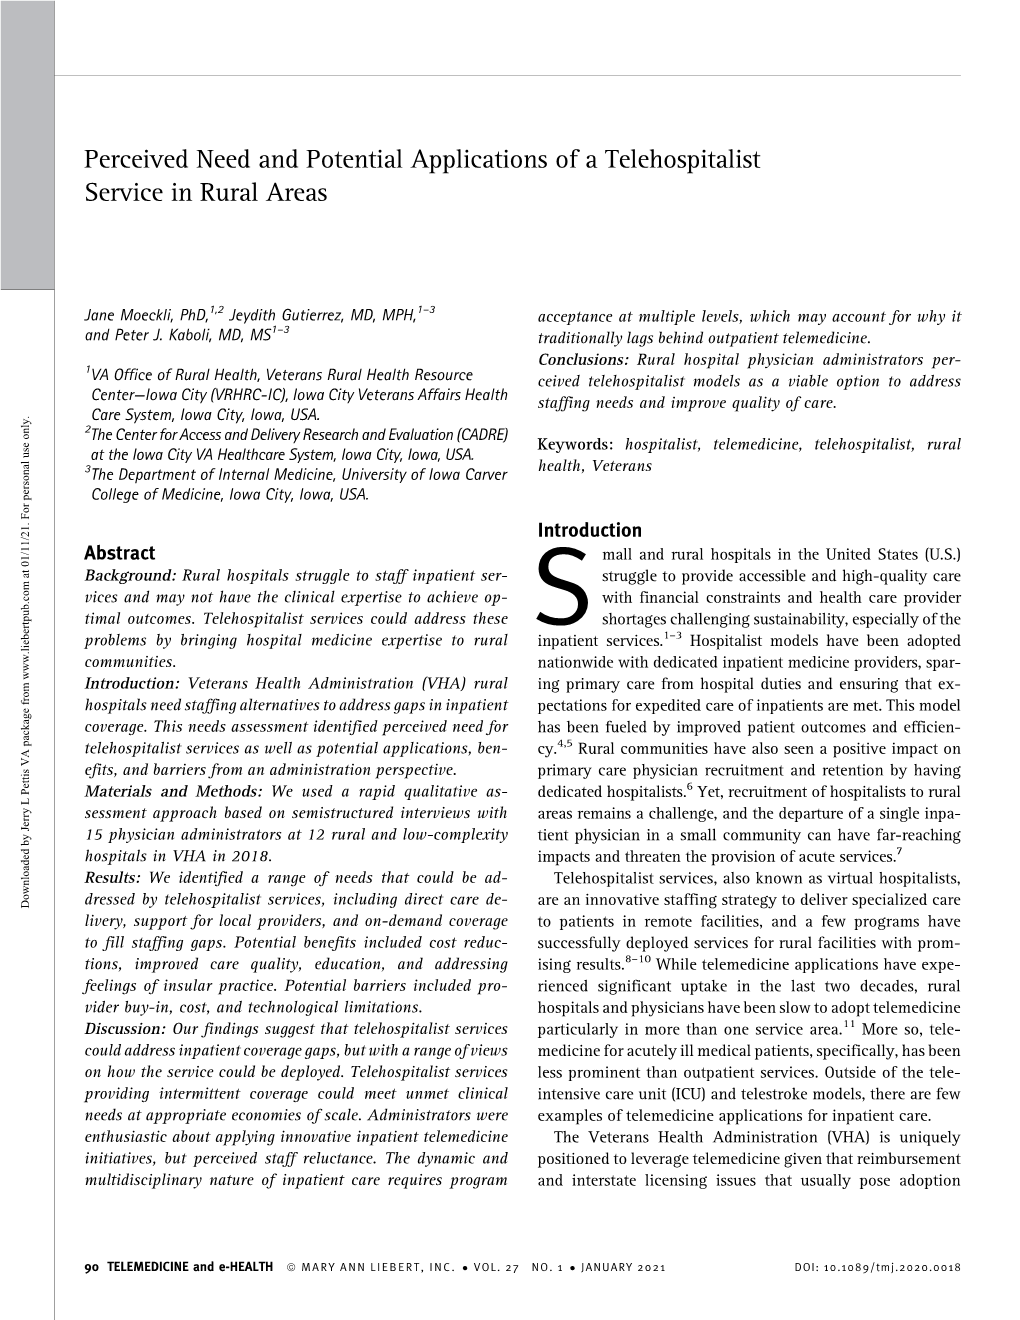 Perceived Need and Potential Applications of a Telehospitalist Service in Rural Areas